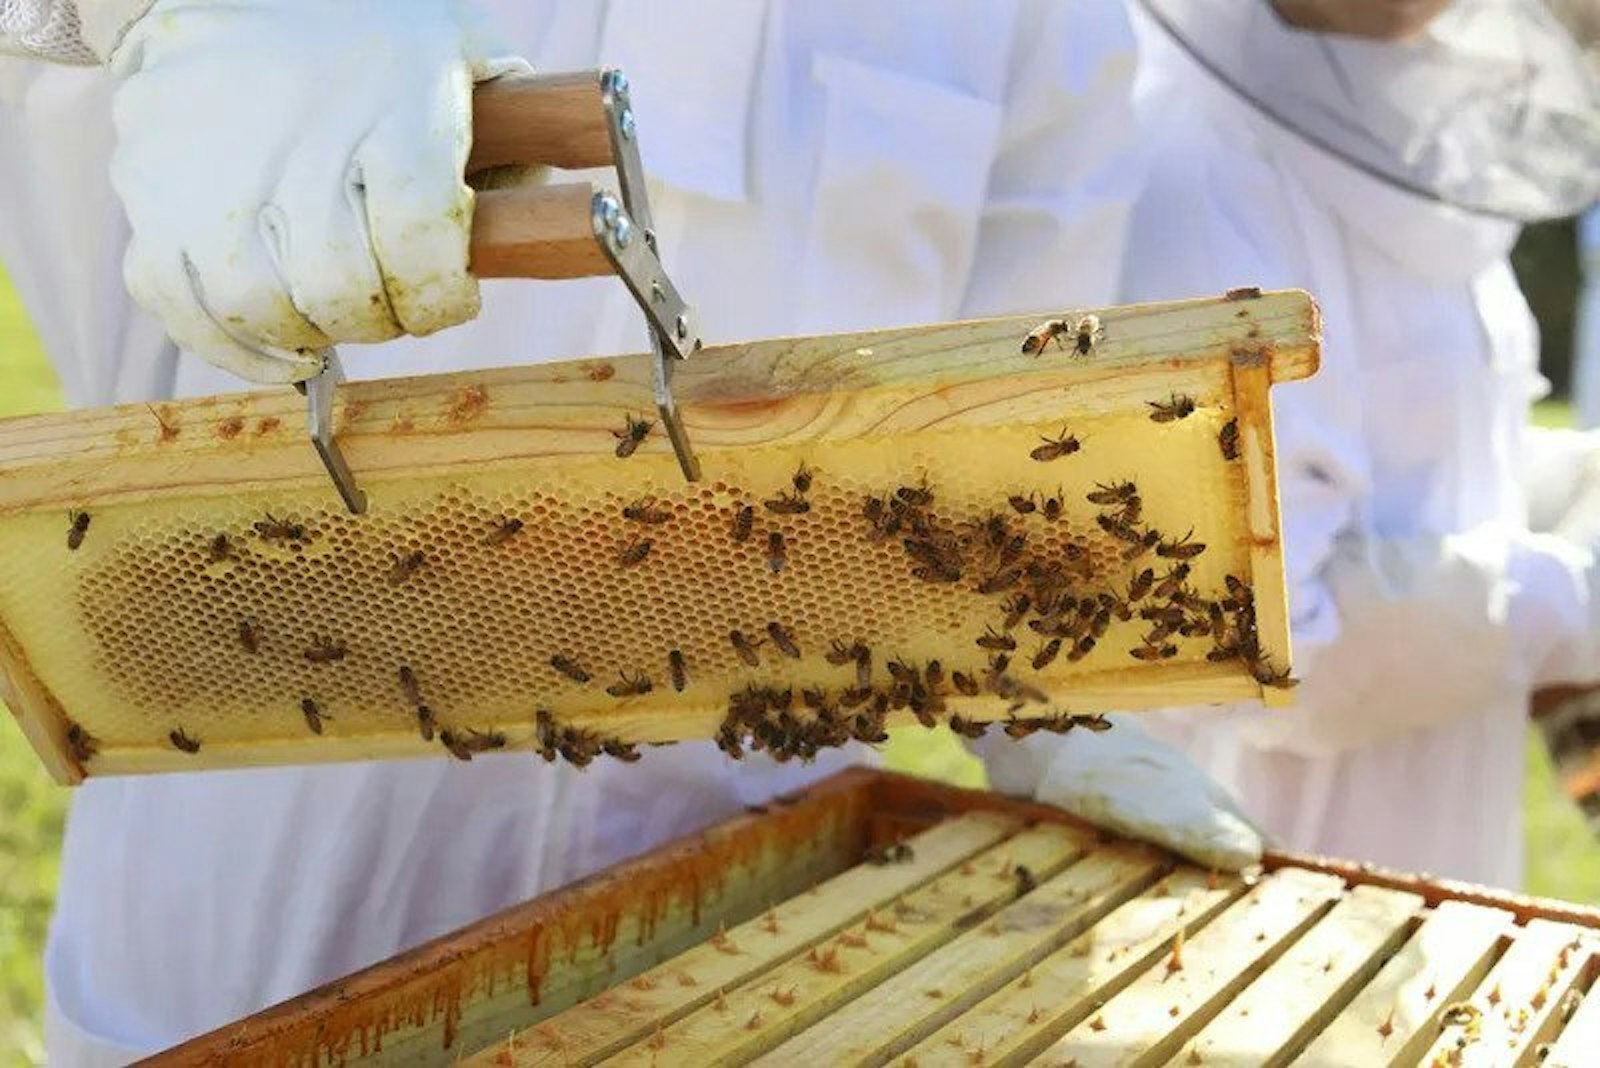 The Bee Club cares for multiple hives on campus, selling the honey collected to fund the club's activities.